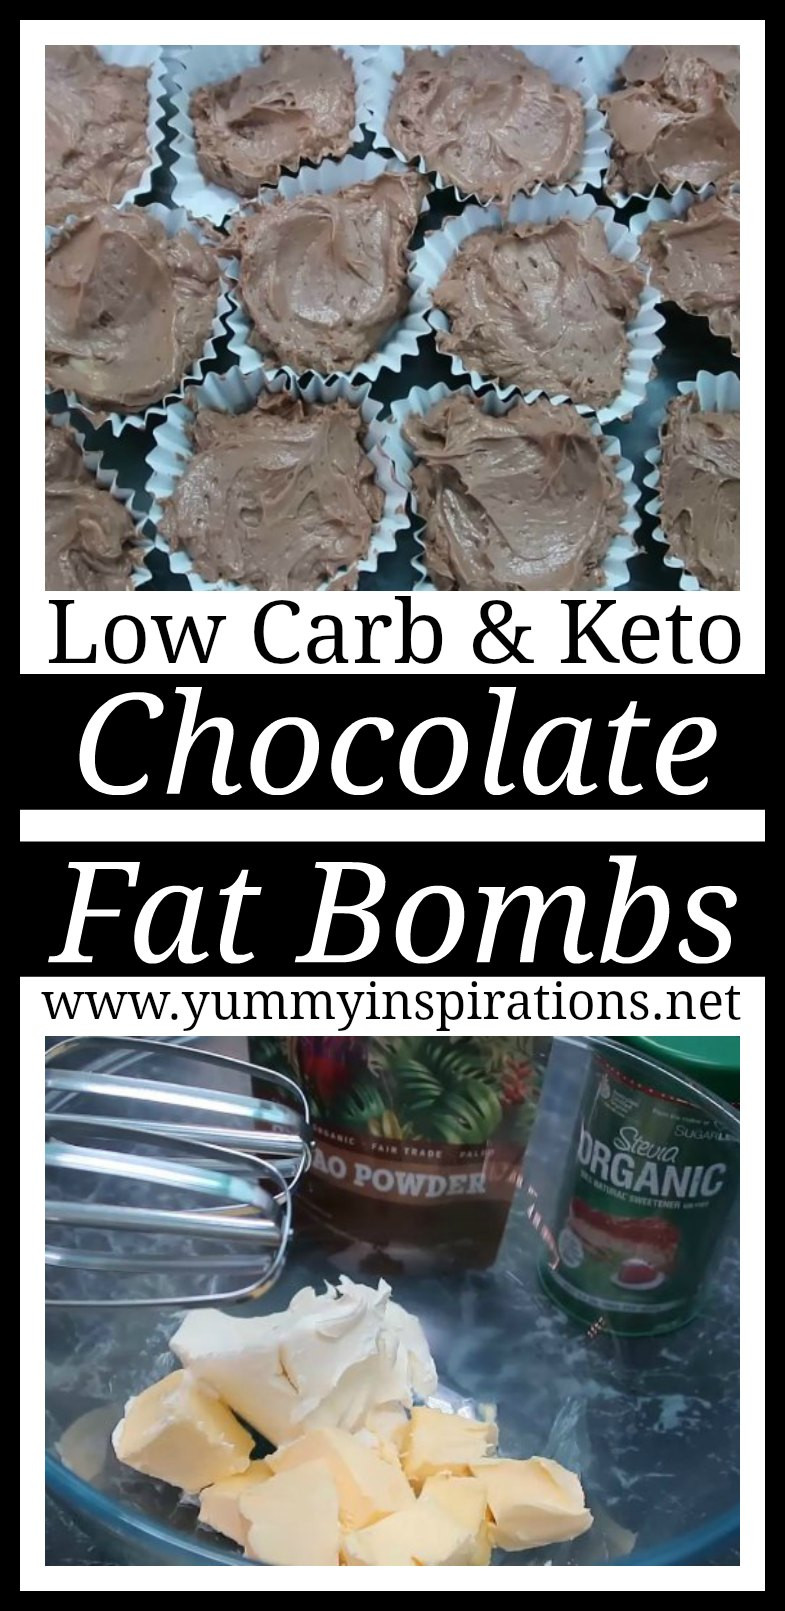 Low Carb Keto Fat Bombs
 Chocolate Cheesecake Fat Bombs Recipe With Cream Cheese